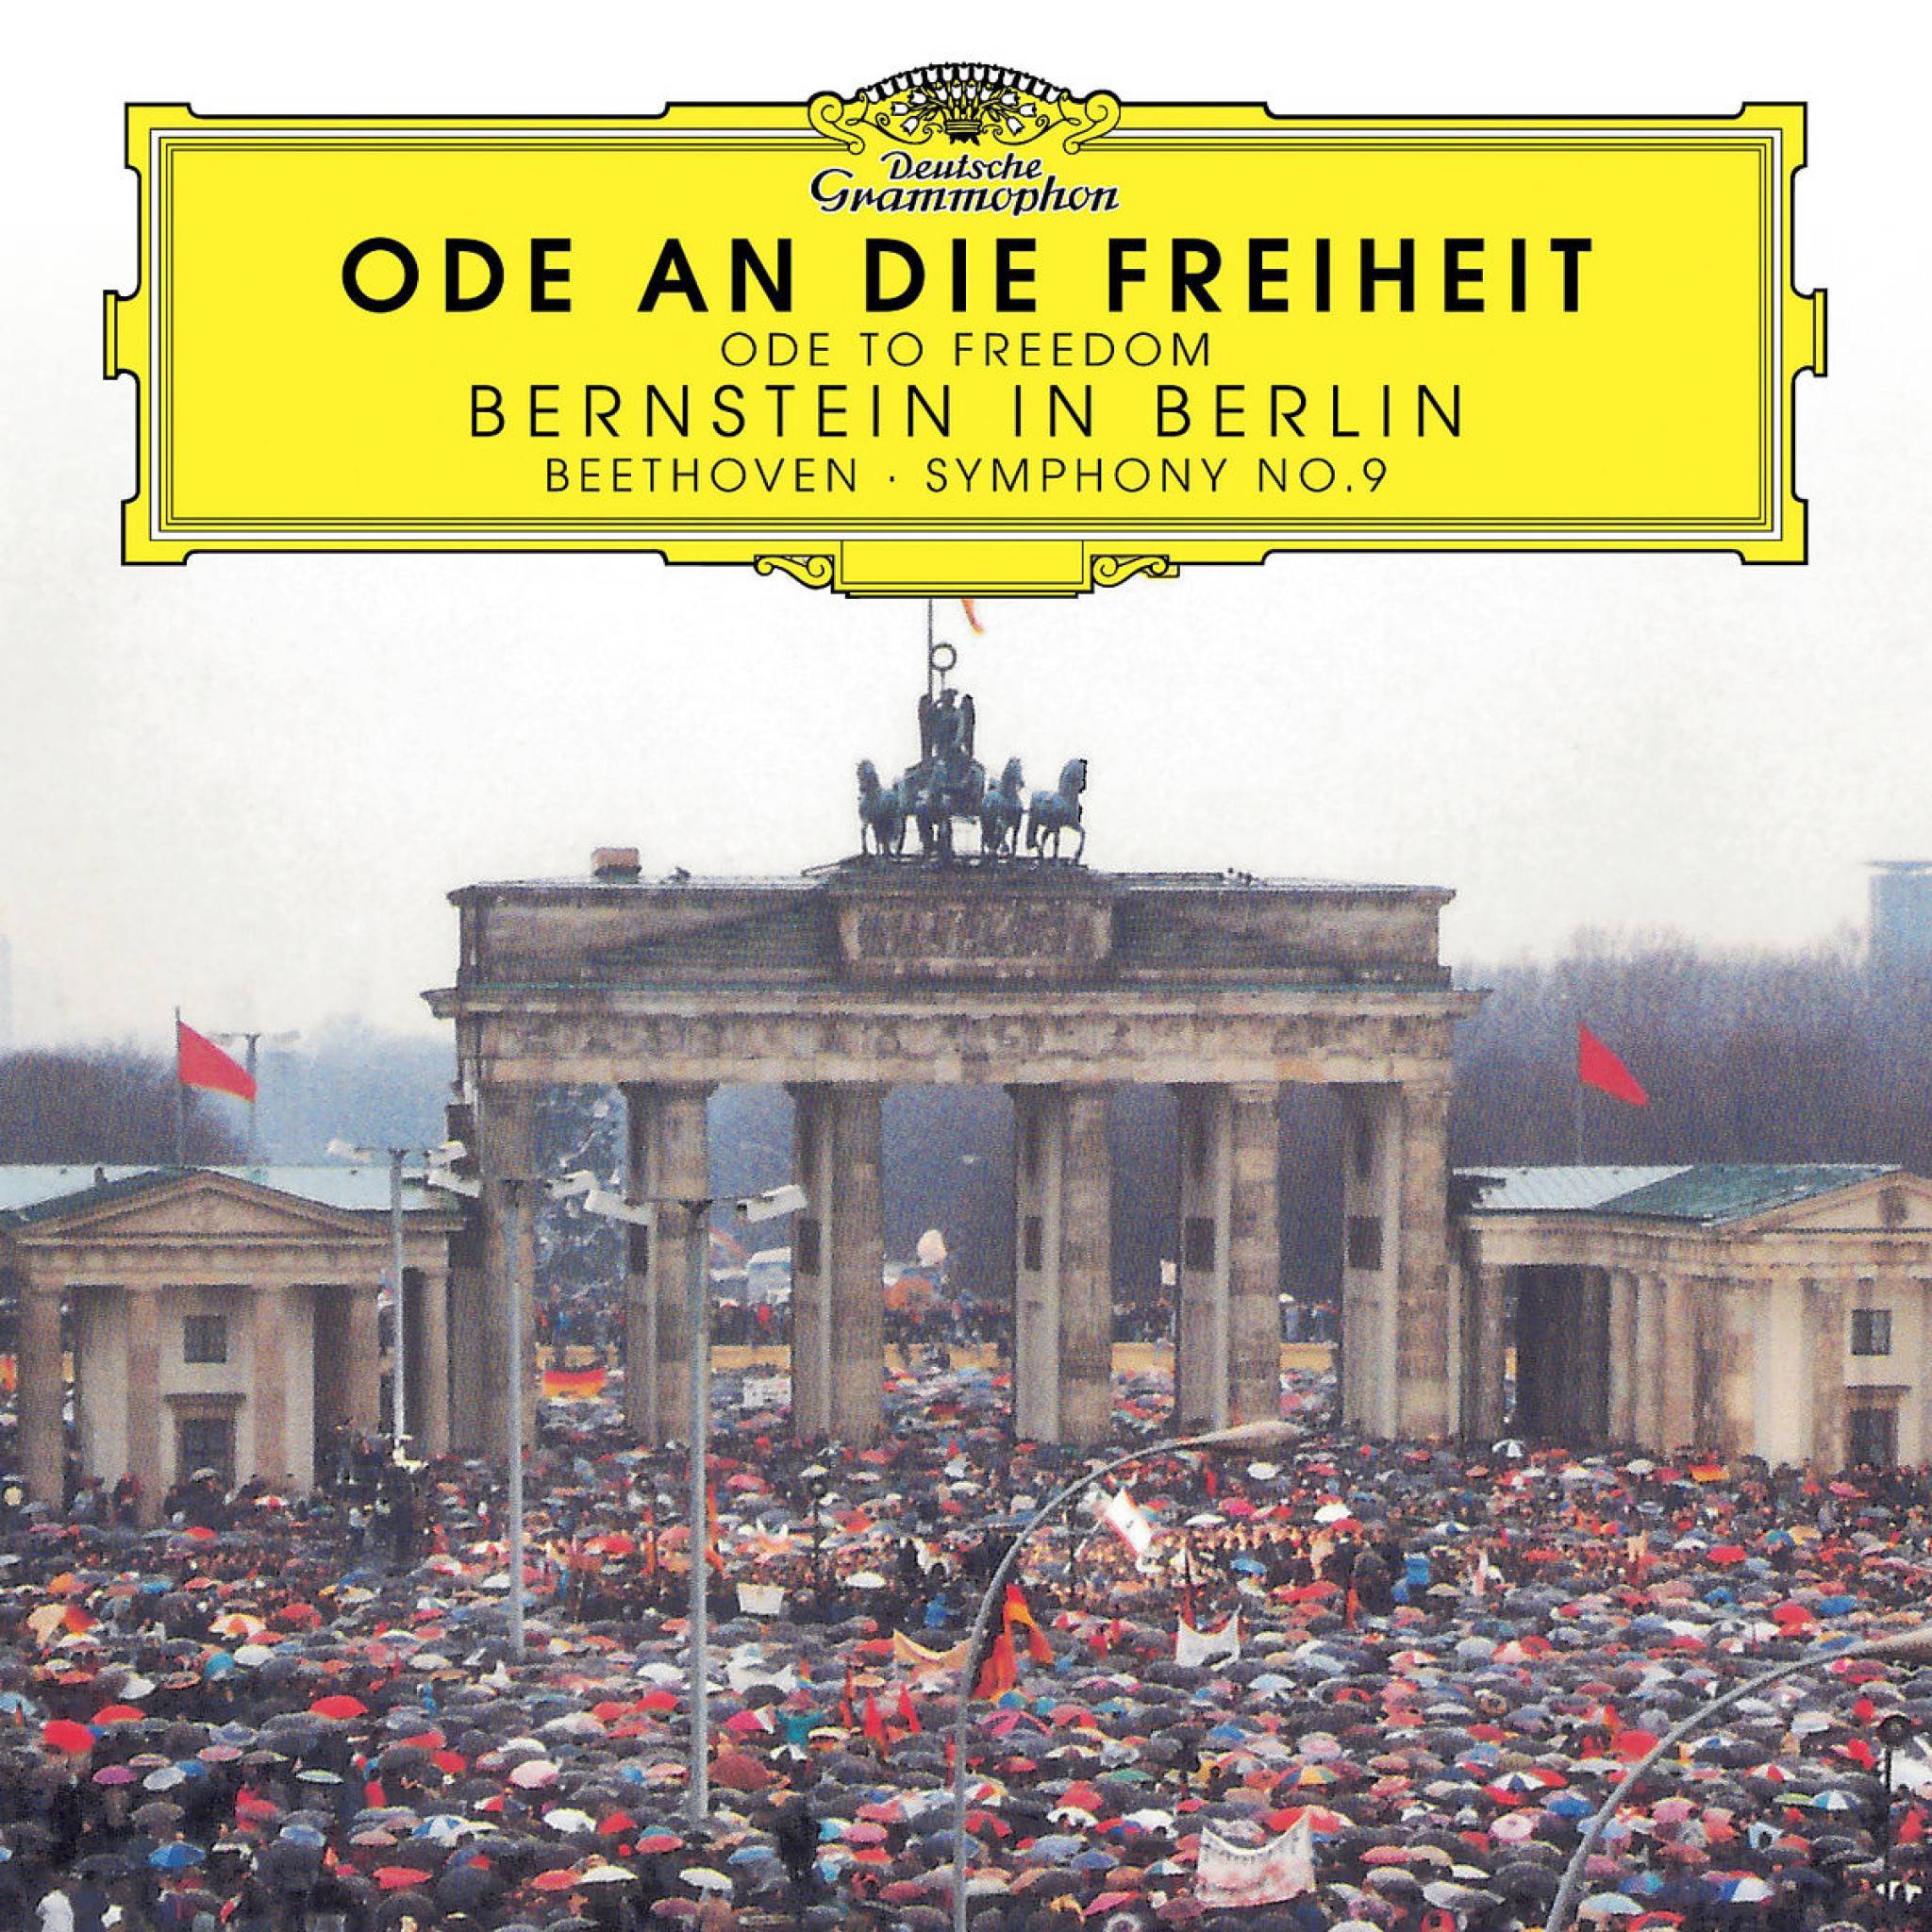 Ode an die Freiheit/Ode to freedom - Beethoven: Symphony No. 9 in D Minor, Op. 125